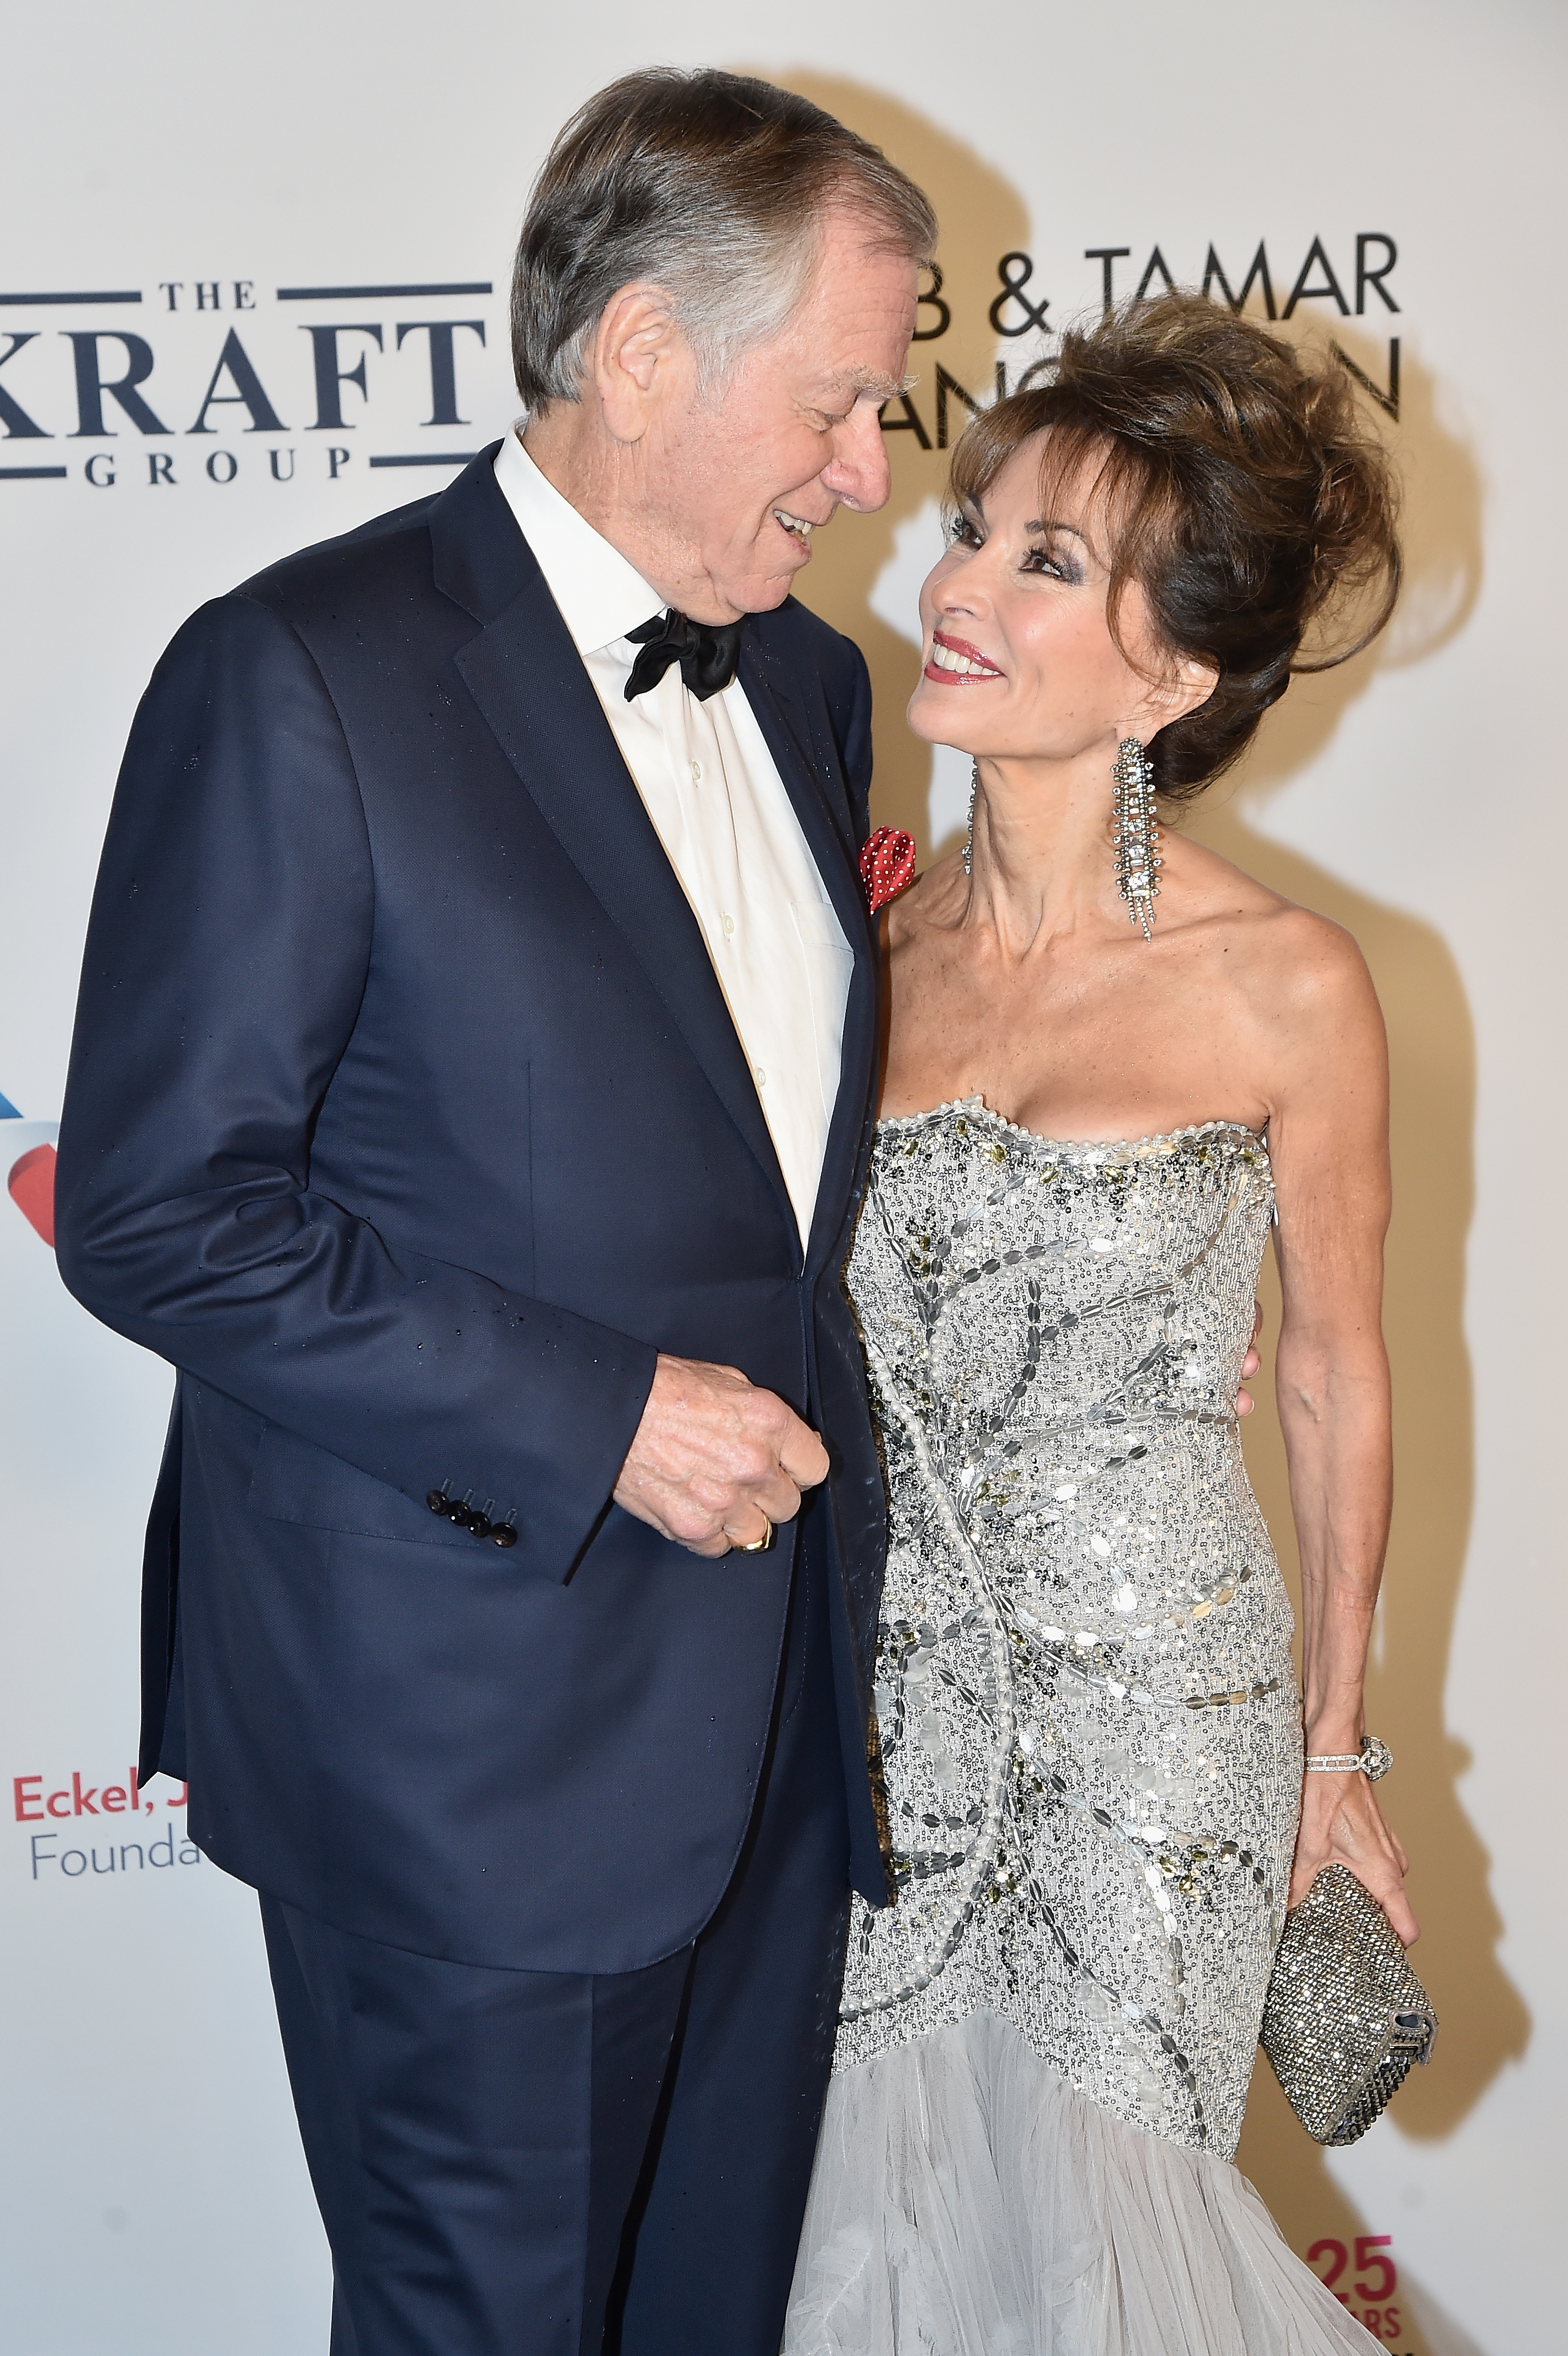 Helmut Huber and Susan Lucci at an event on November 7, 2017 in New York City | Source: Getty Images